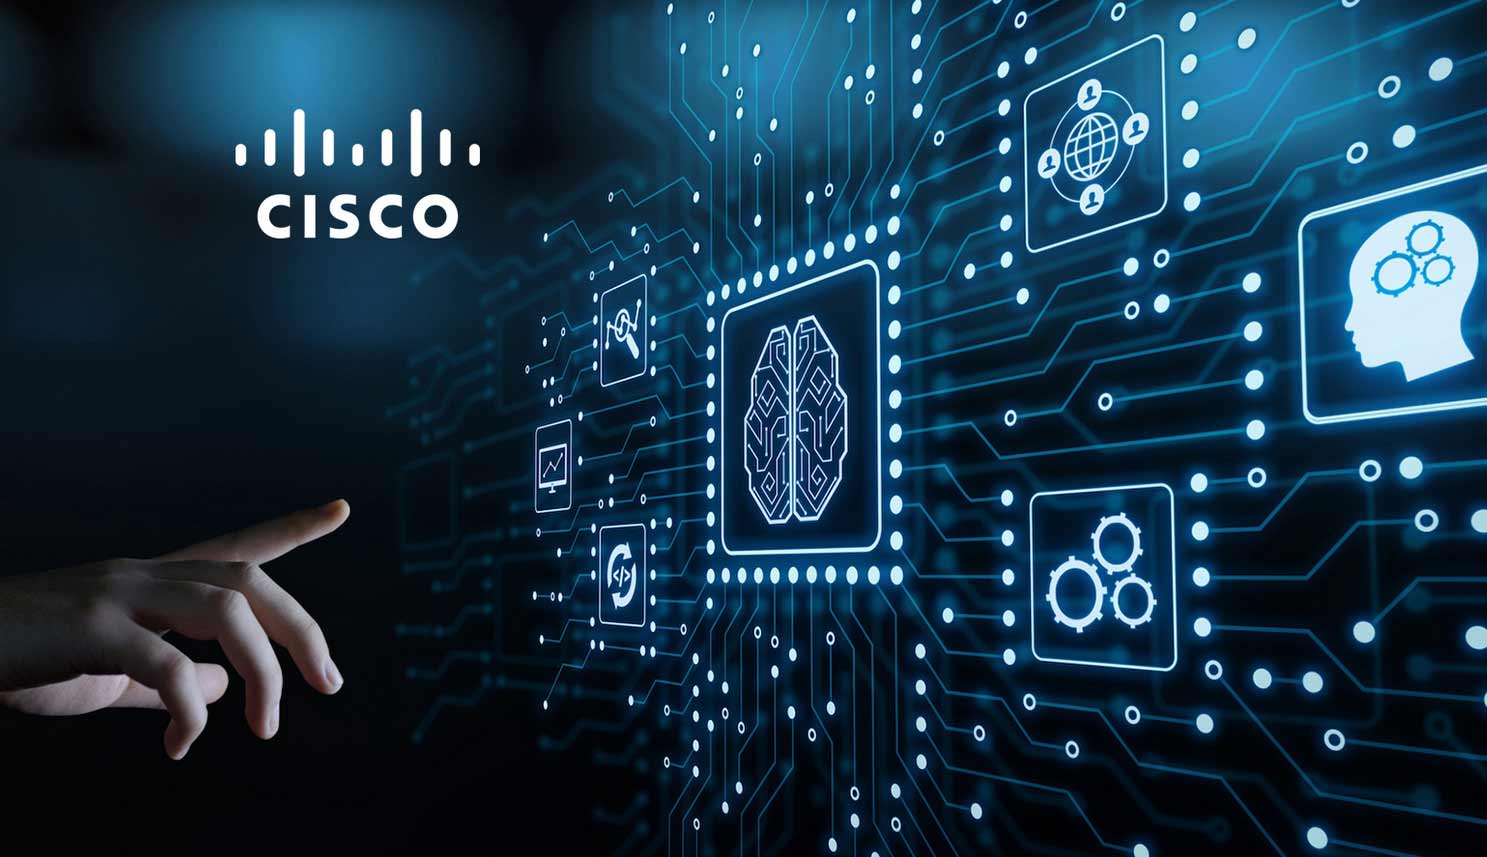 Cisco on 21st Sep 2023 to Acquire Cybersecurity Company Splunk for About $28 Bi